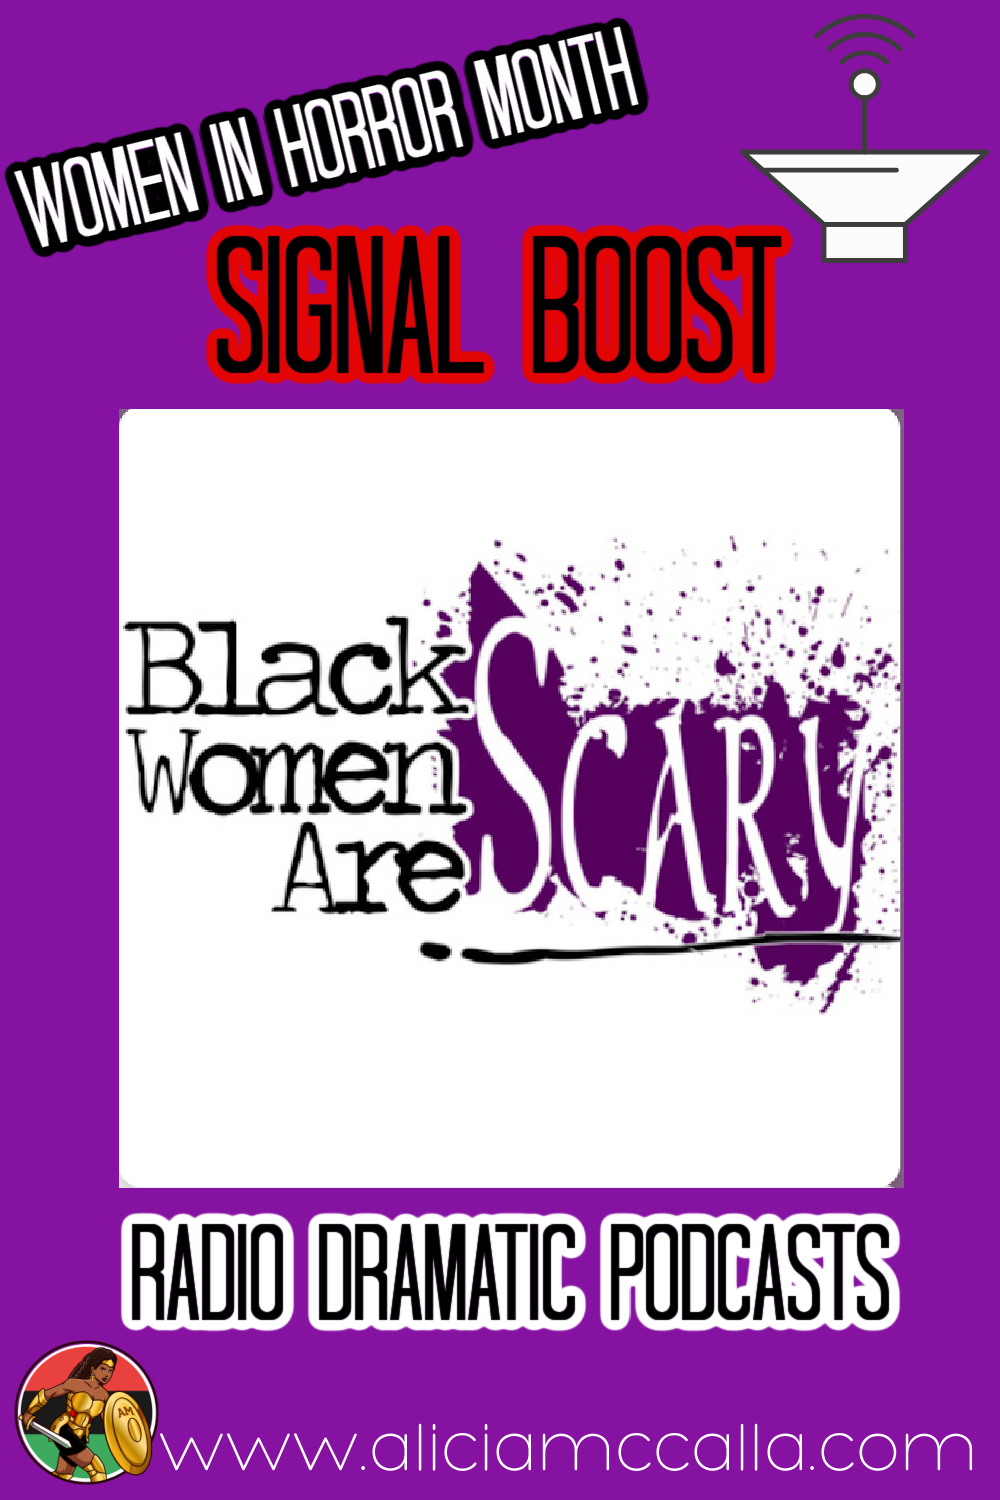 Women in Horror Month: Signal Boost Black Women Are Scary